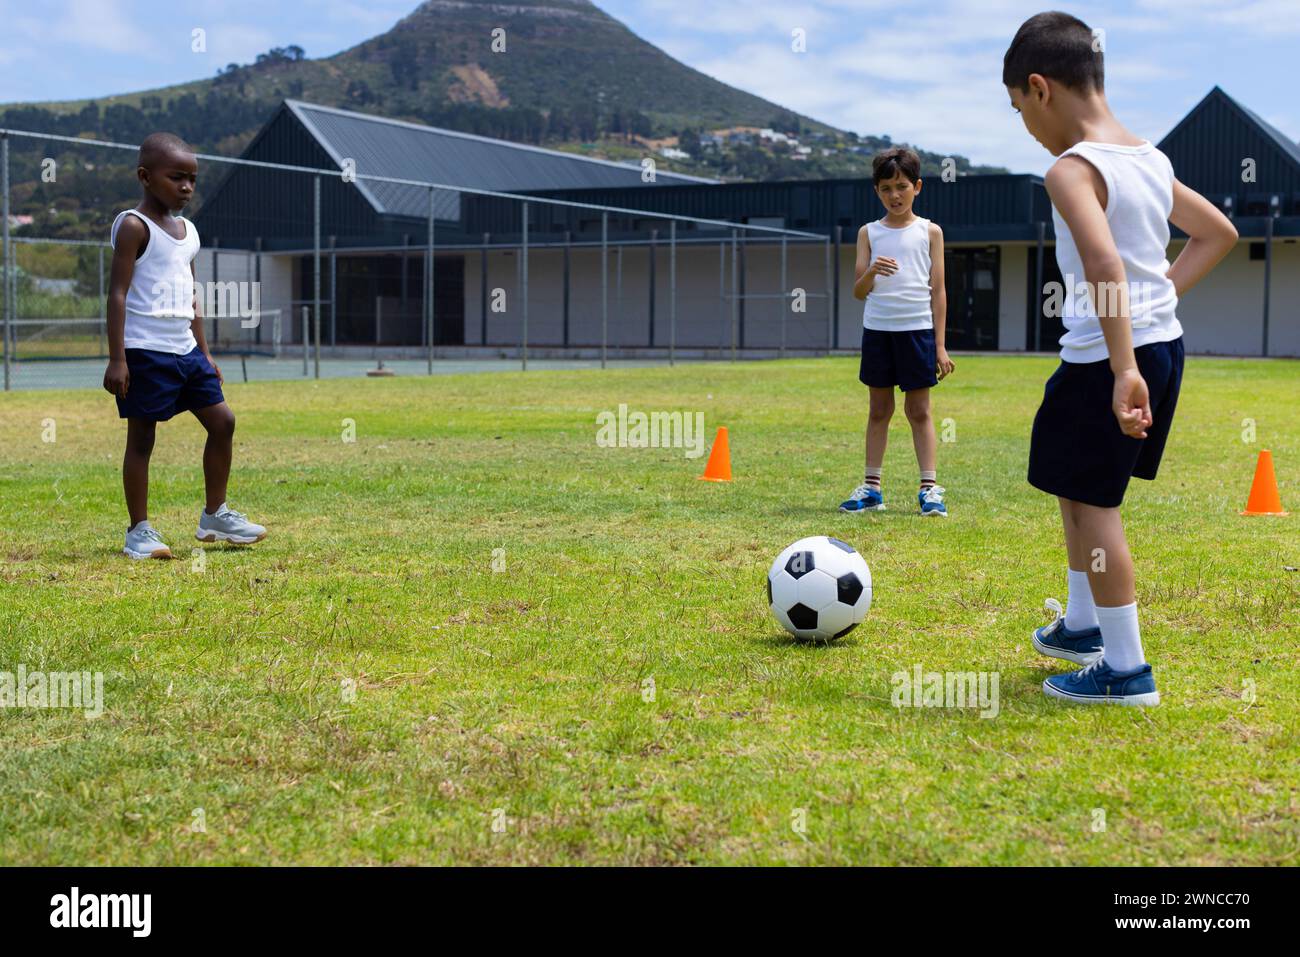 Three boys are standing on a grassy field with a soccer ball, ready to play in school Stock Photo